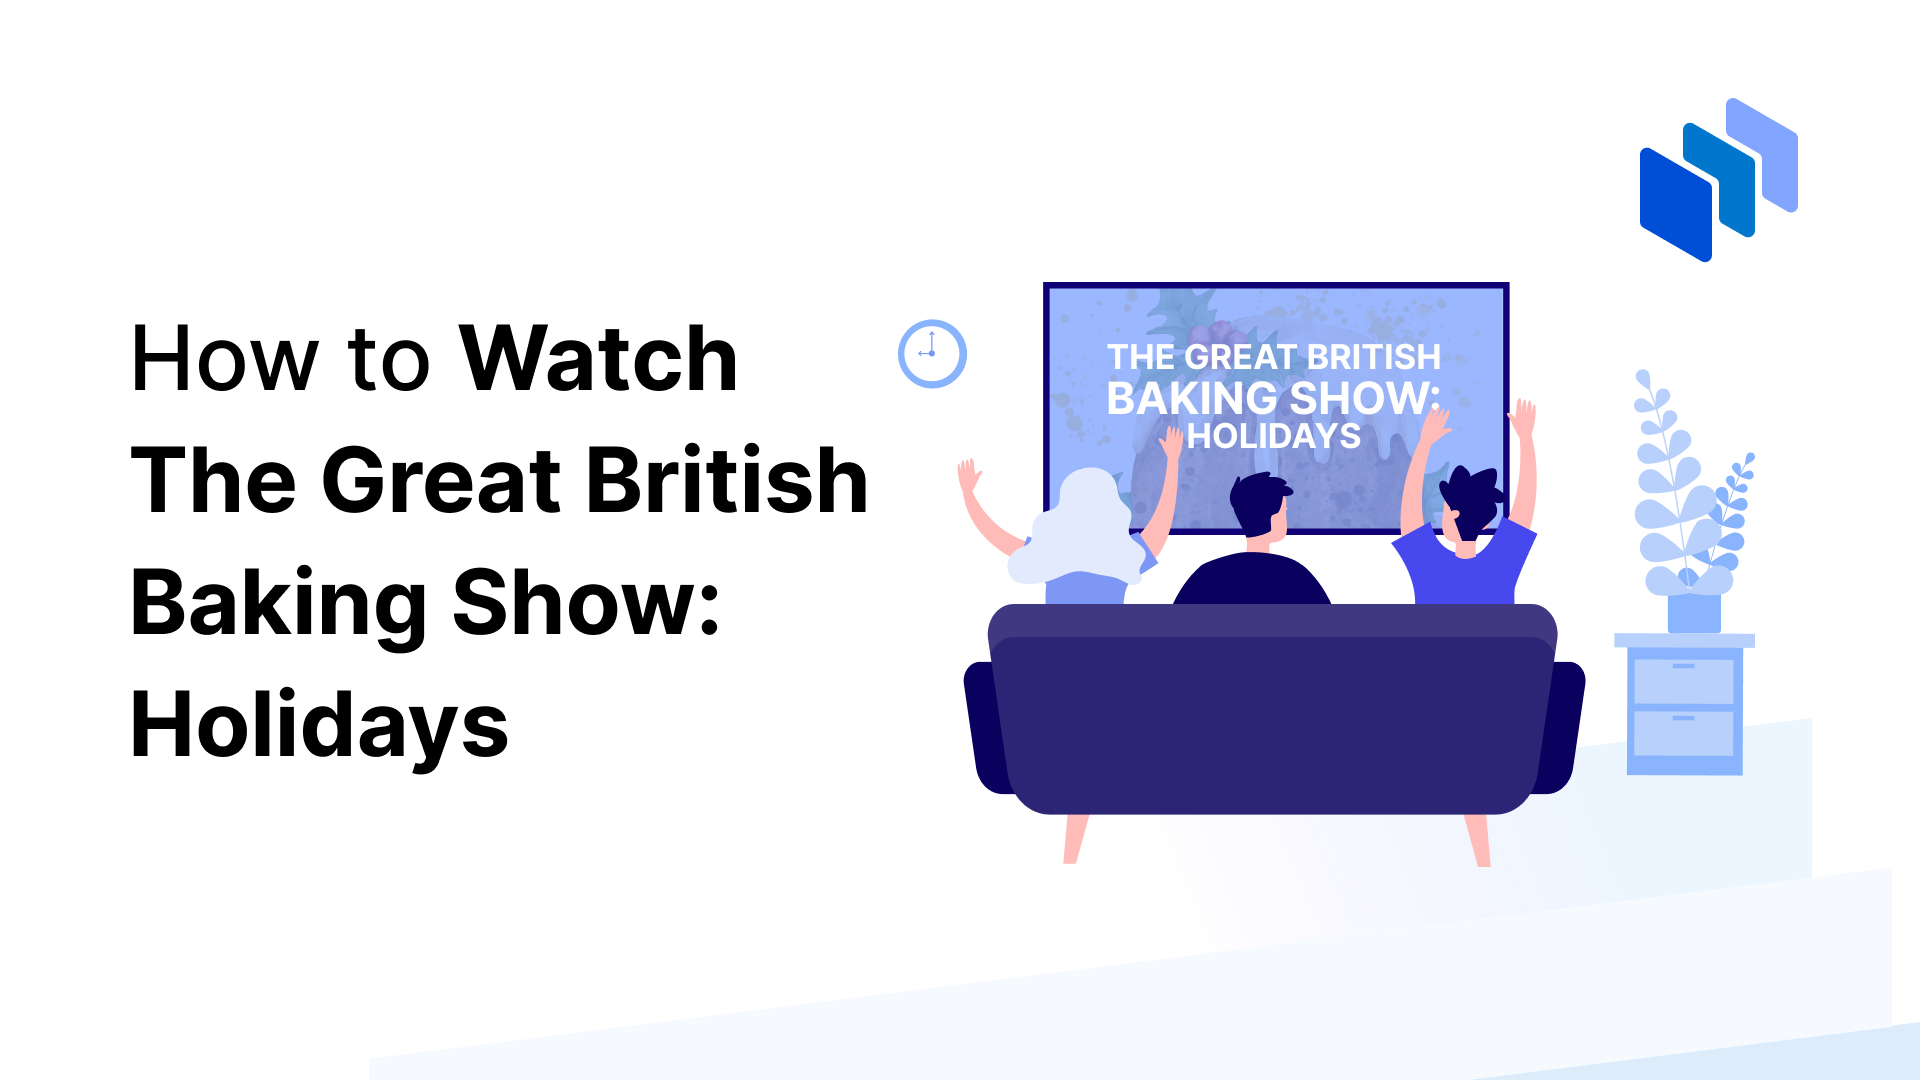 How to watch The Great British Baking Show